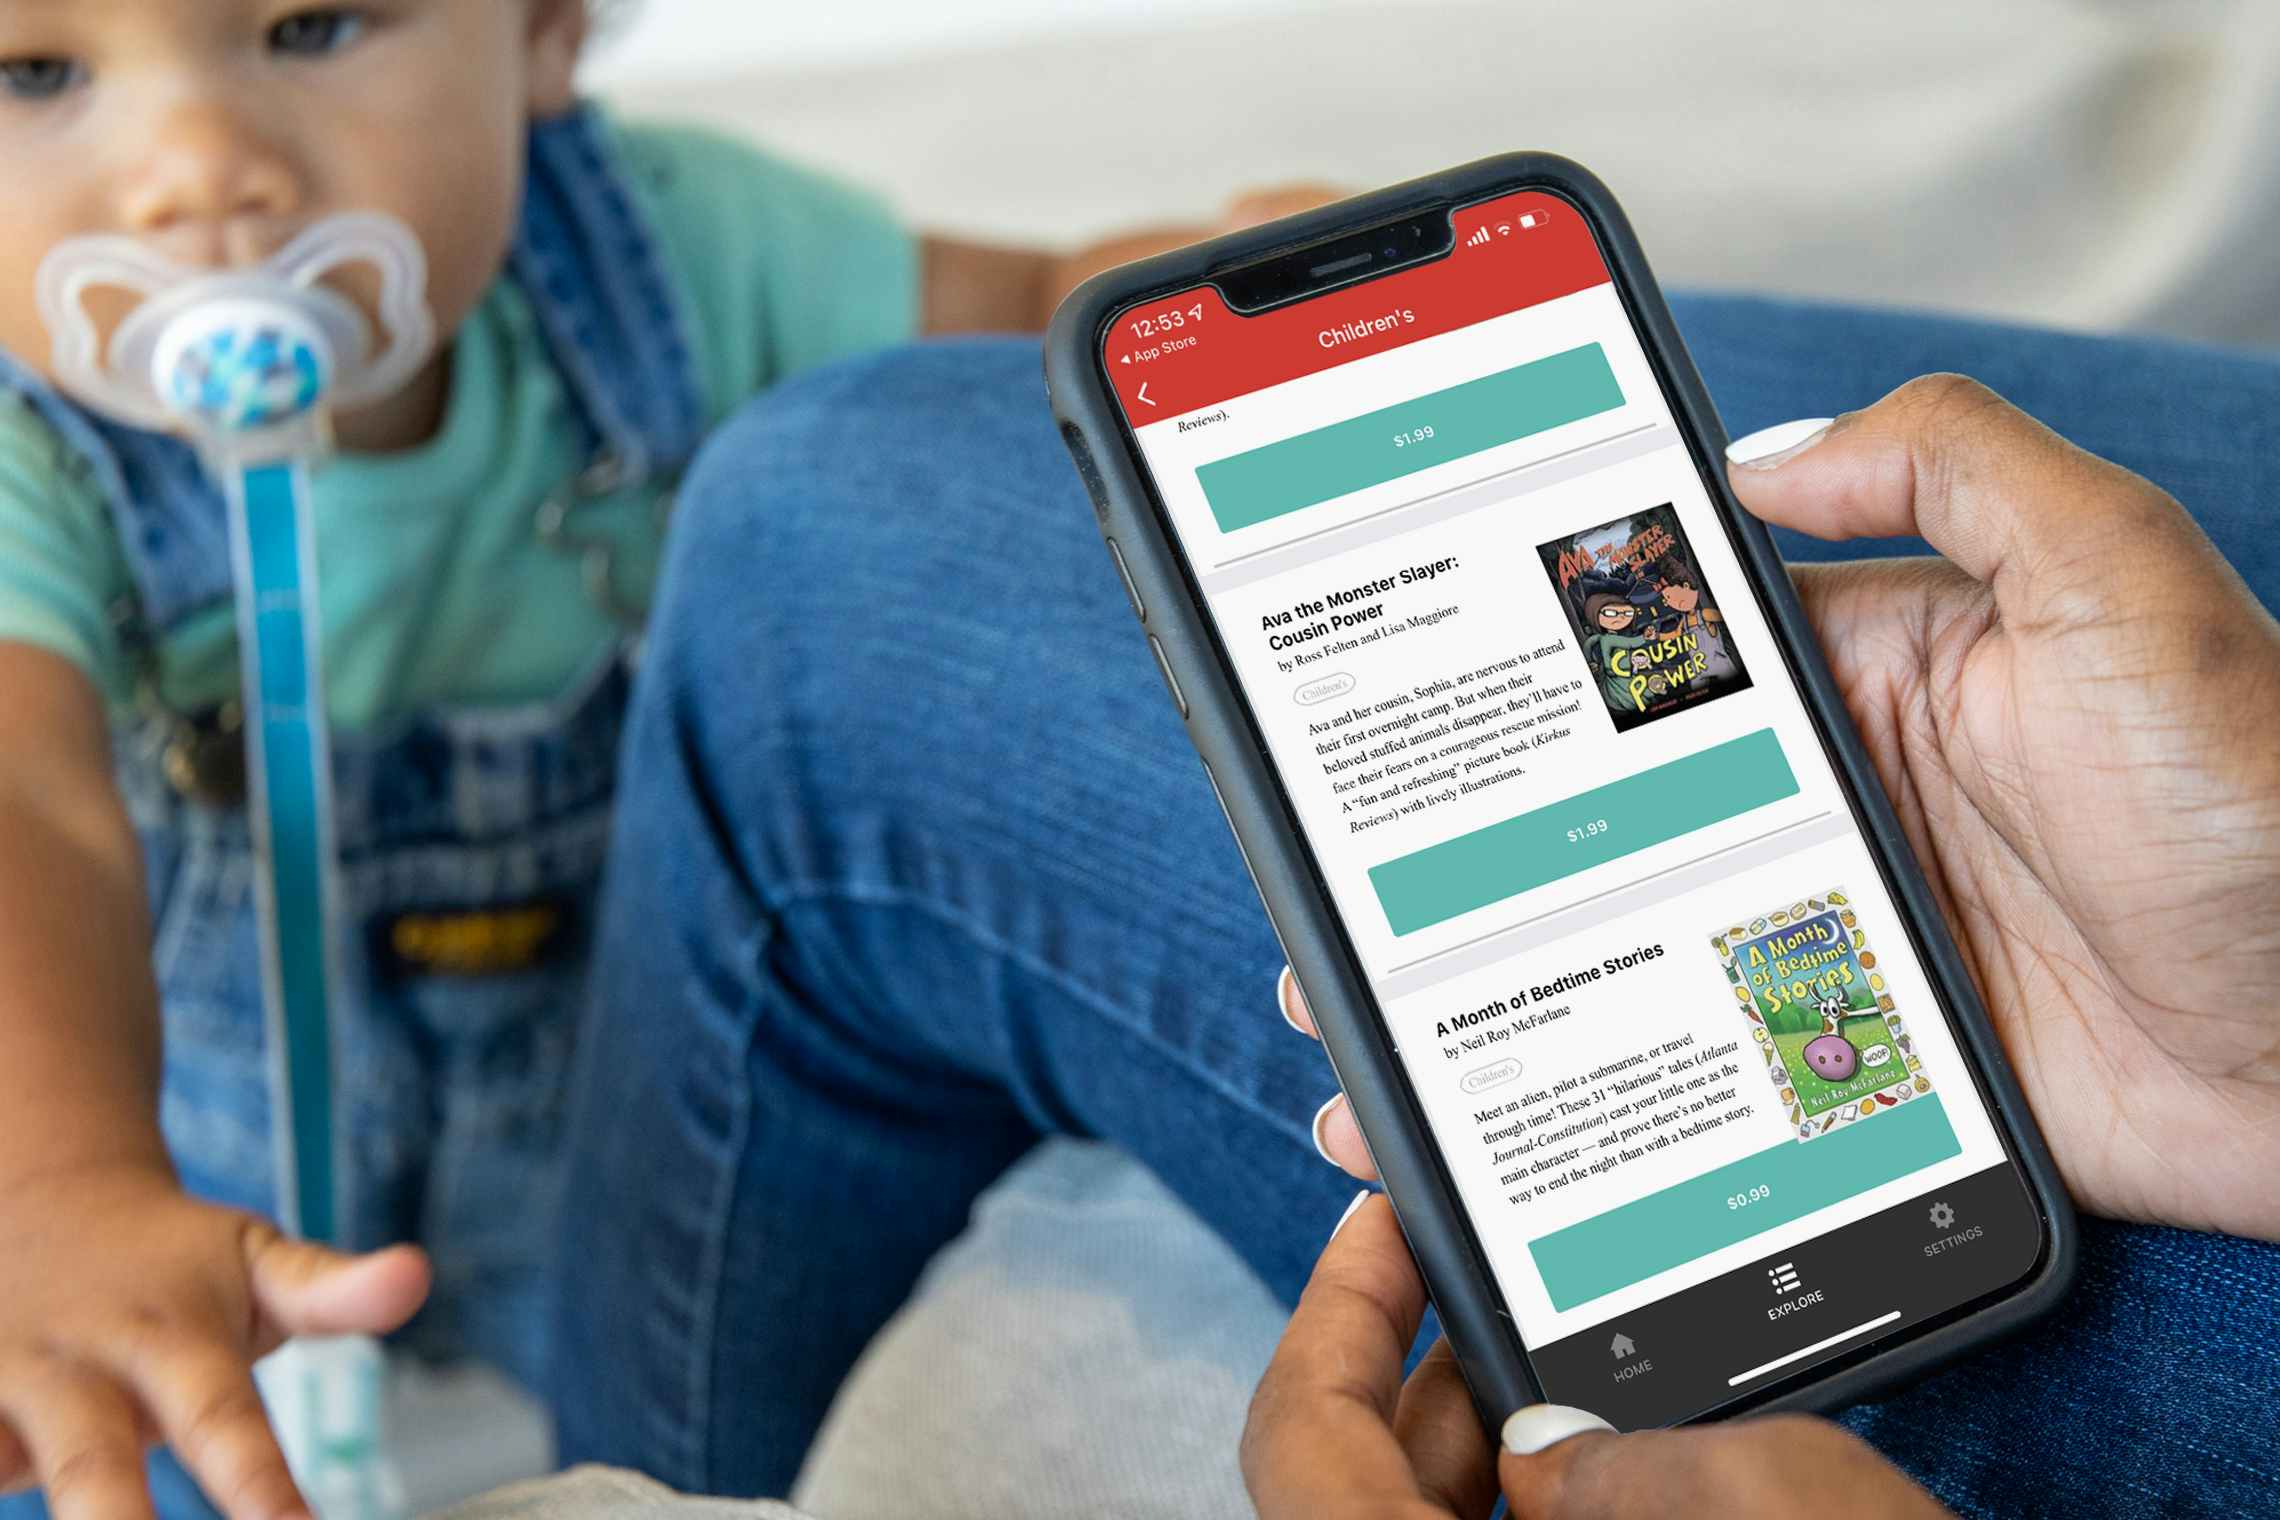 A woman holding a Bookbub app with children's books on the screen. A toddler is in the background.